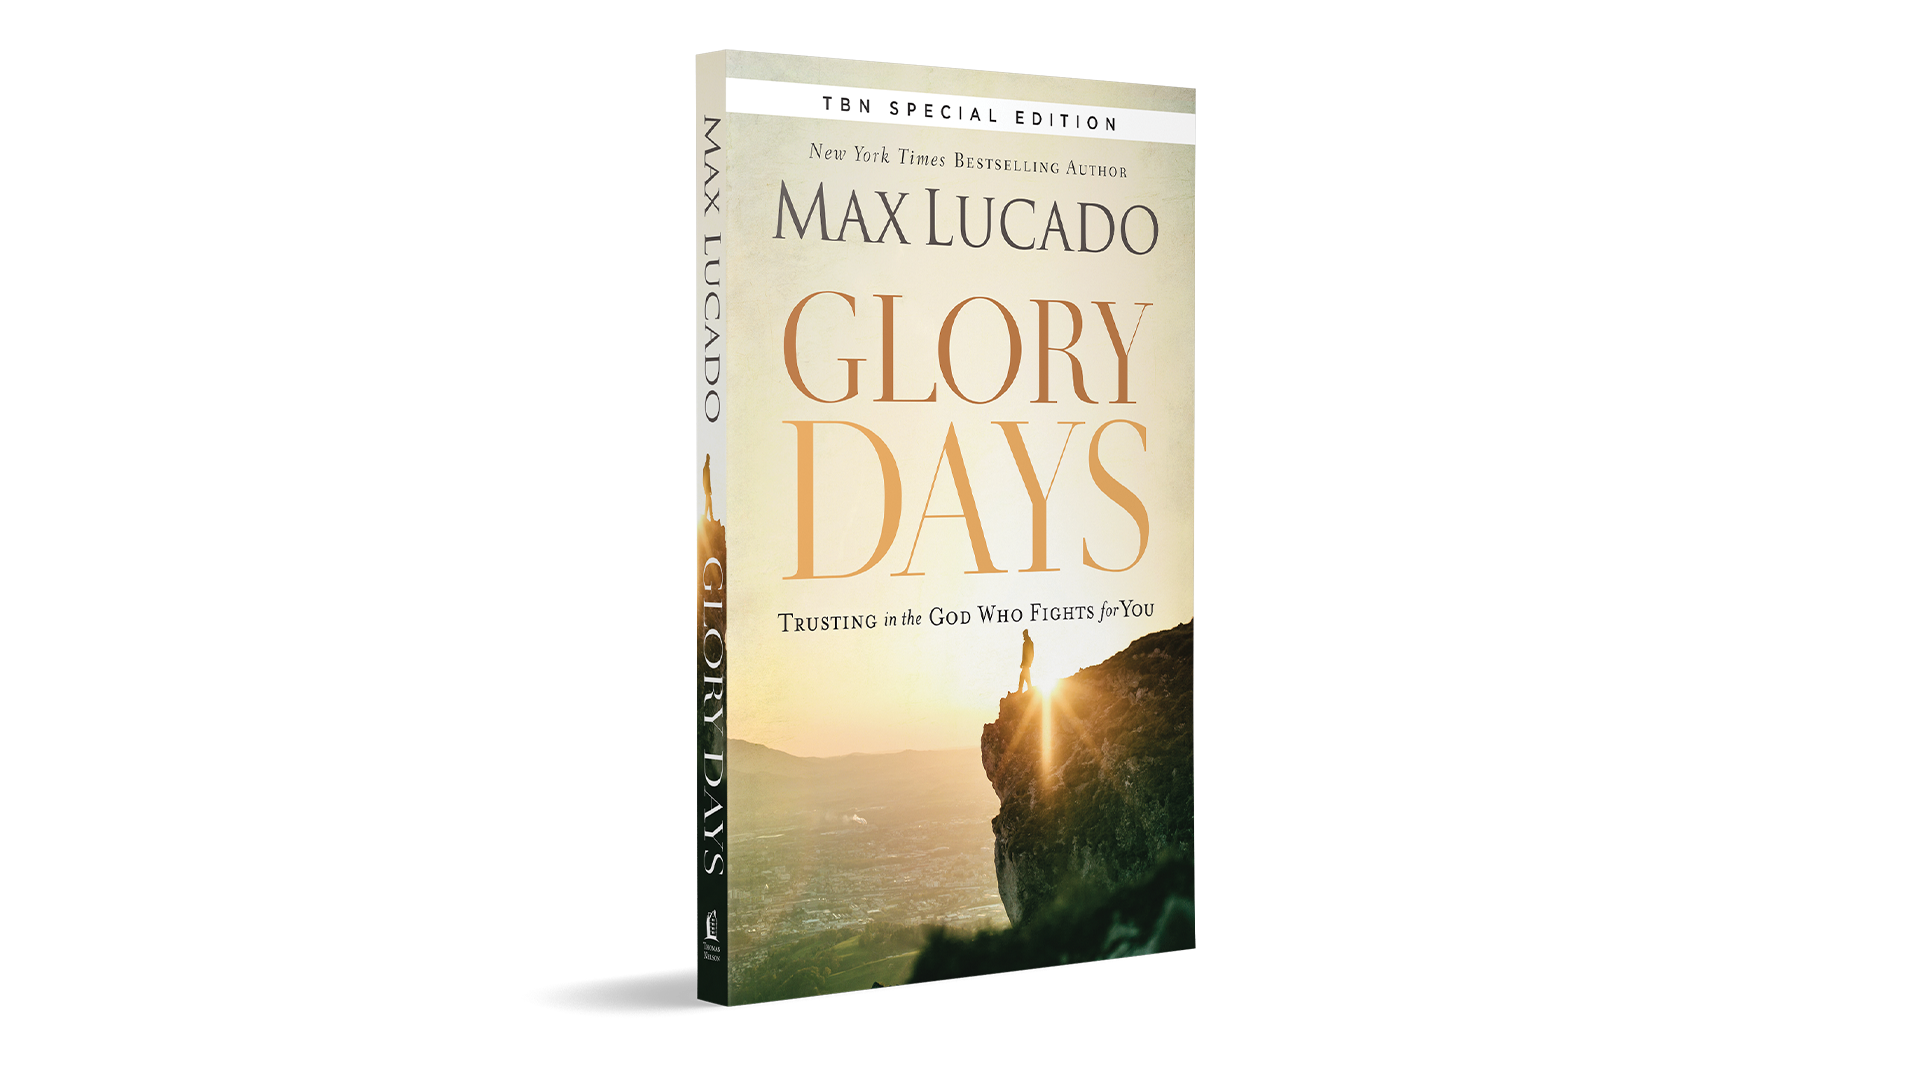 Receive Glory Days: Trusting in the God Who Fights for You by Max Lucado on TBN